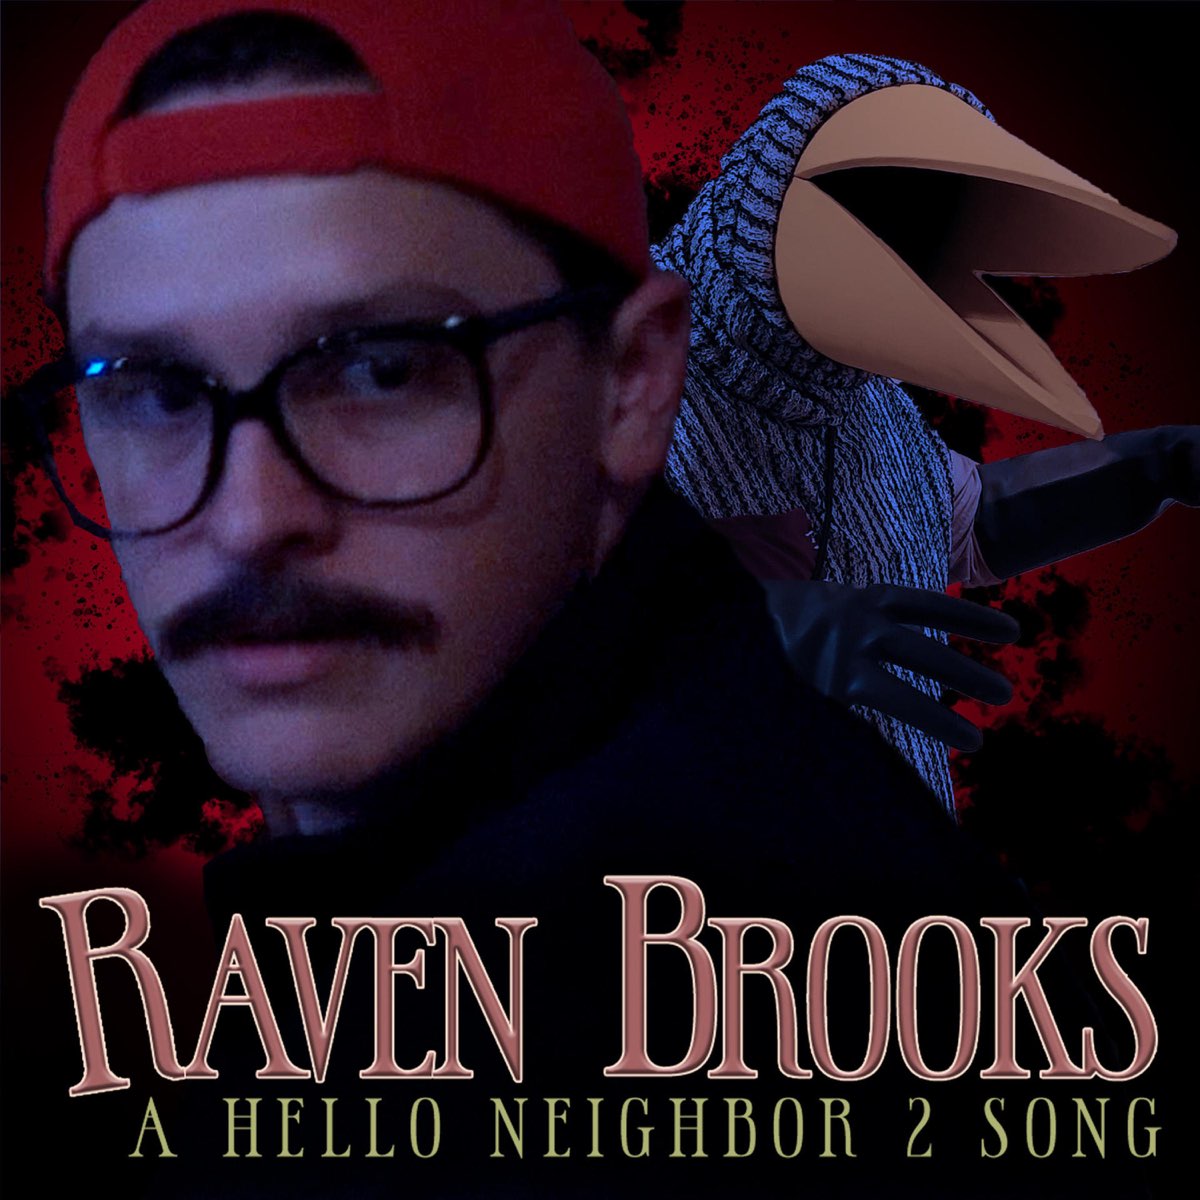 Brook hello. Рейвен Брукс. Равен Брукс город. Рейвен Брукс привет сосед. Welcome to Raven Brooks.